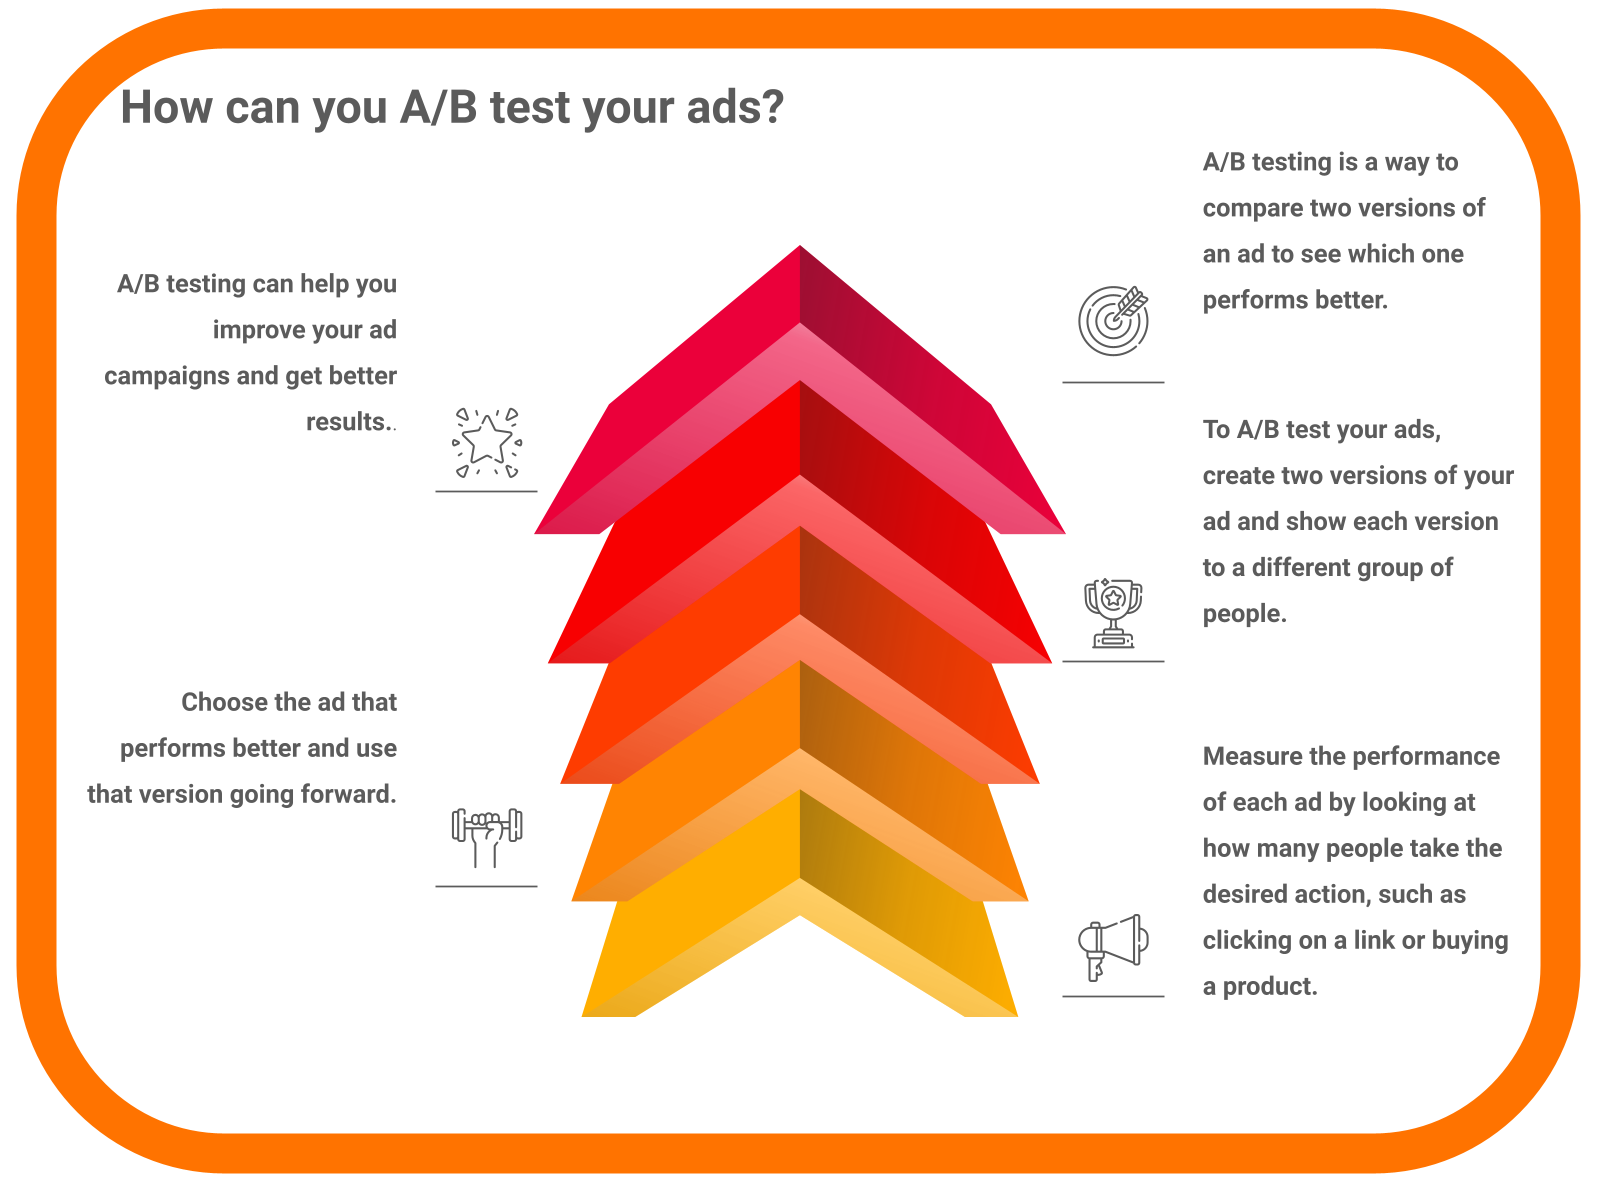 How can you A/B test your ads?